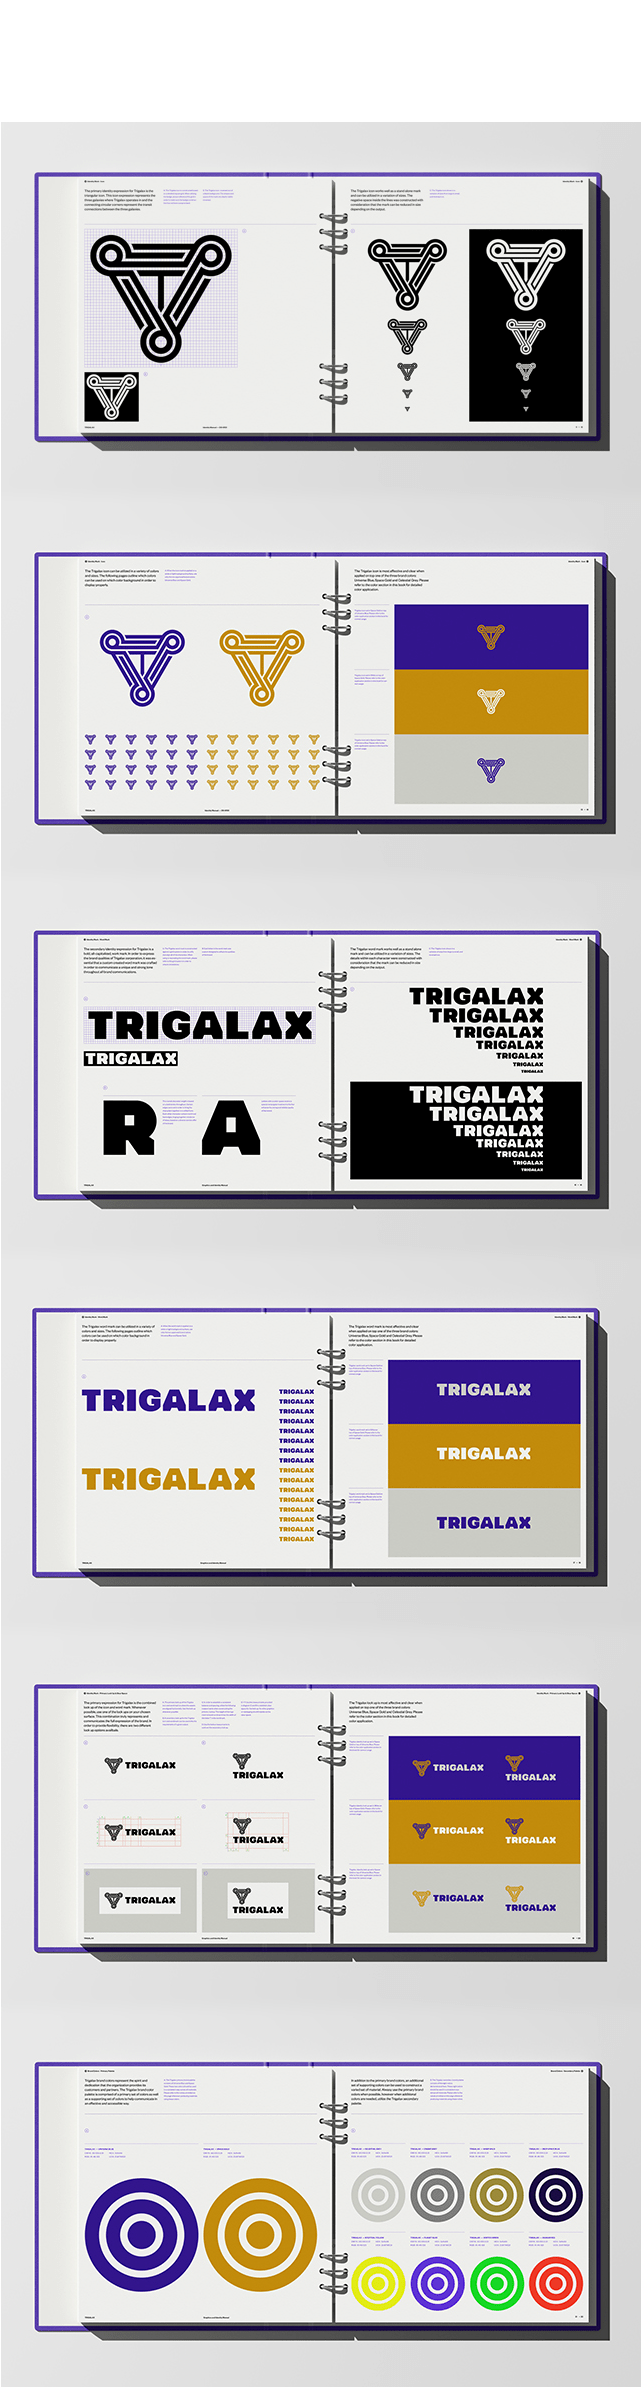 04_Trigalax-Space-Branding-guidelines-02-M